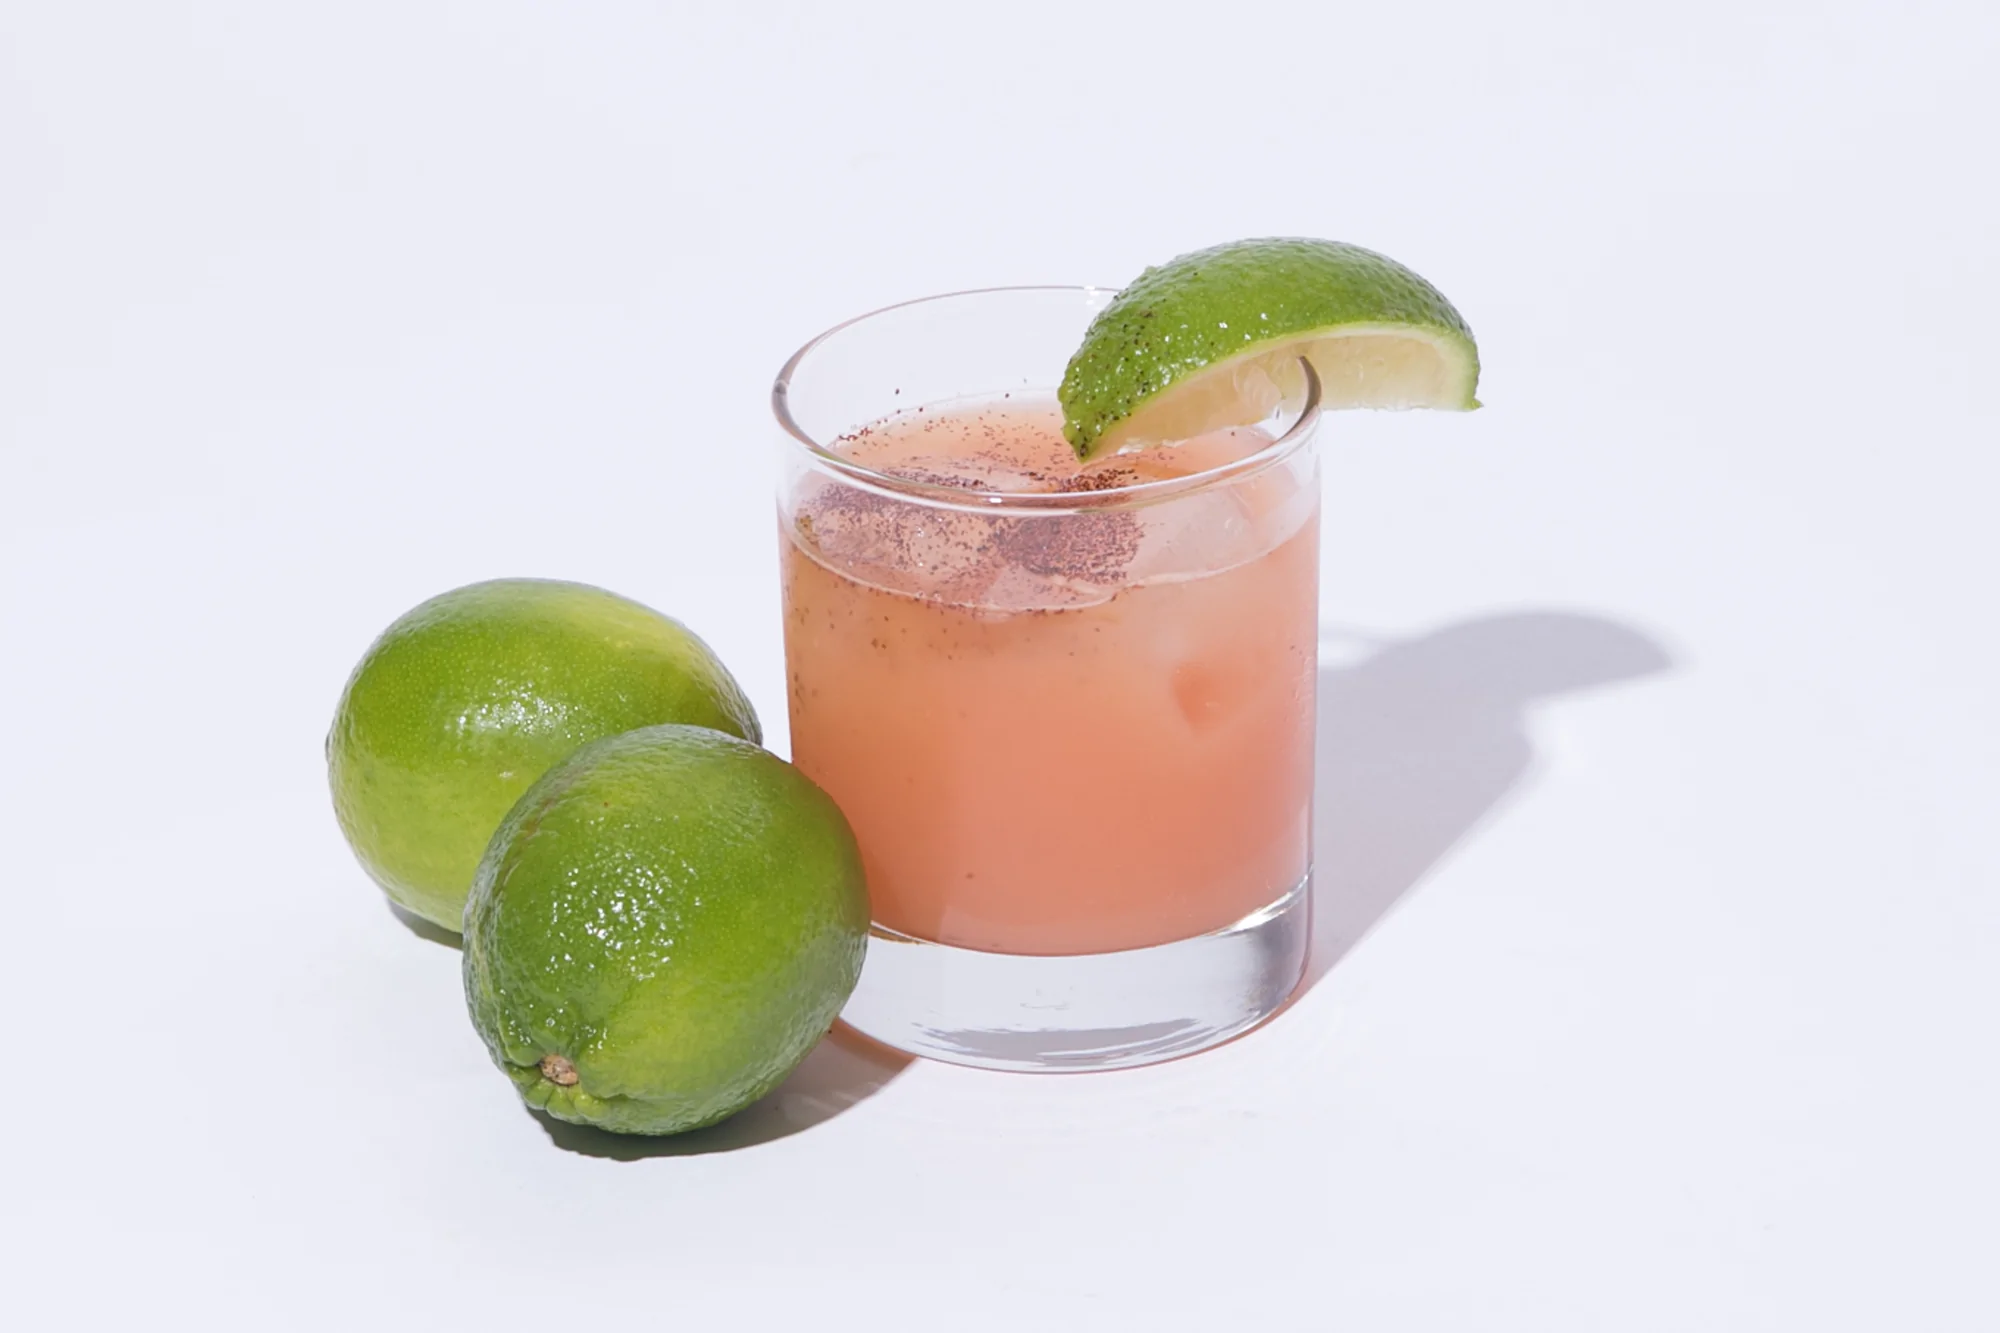 spicy grapefruit margarita with limes